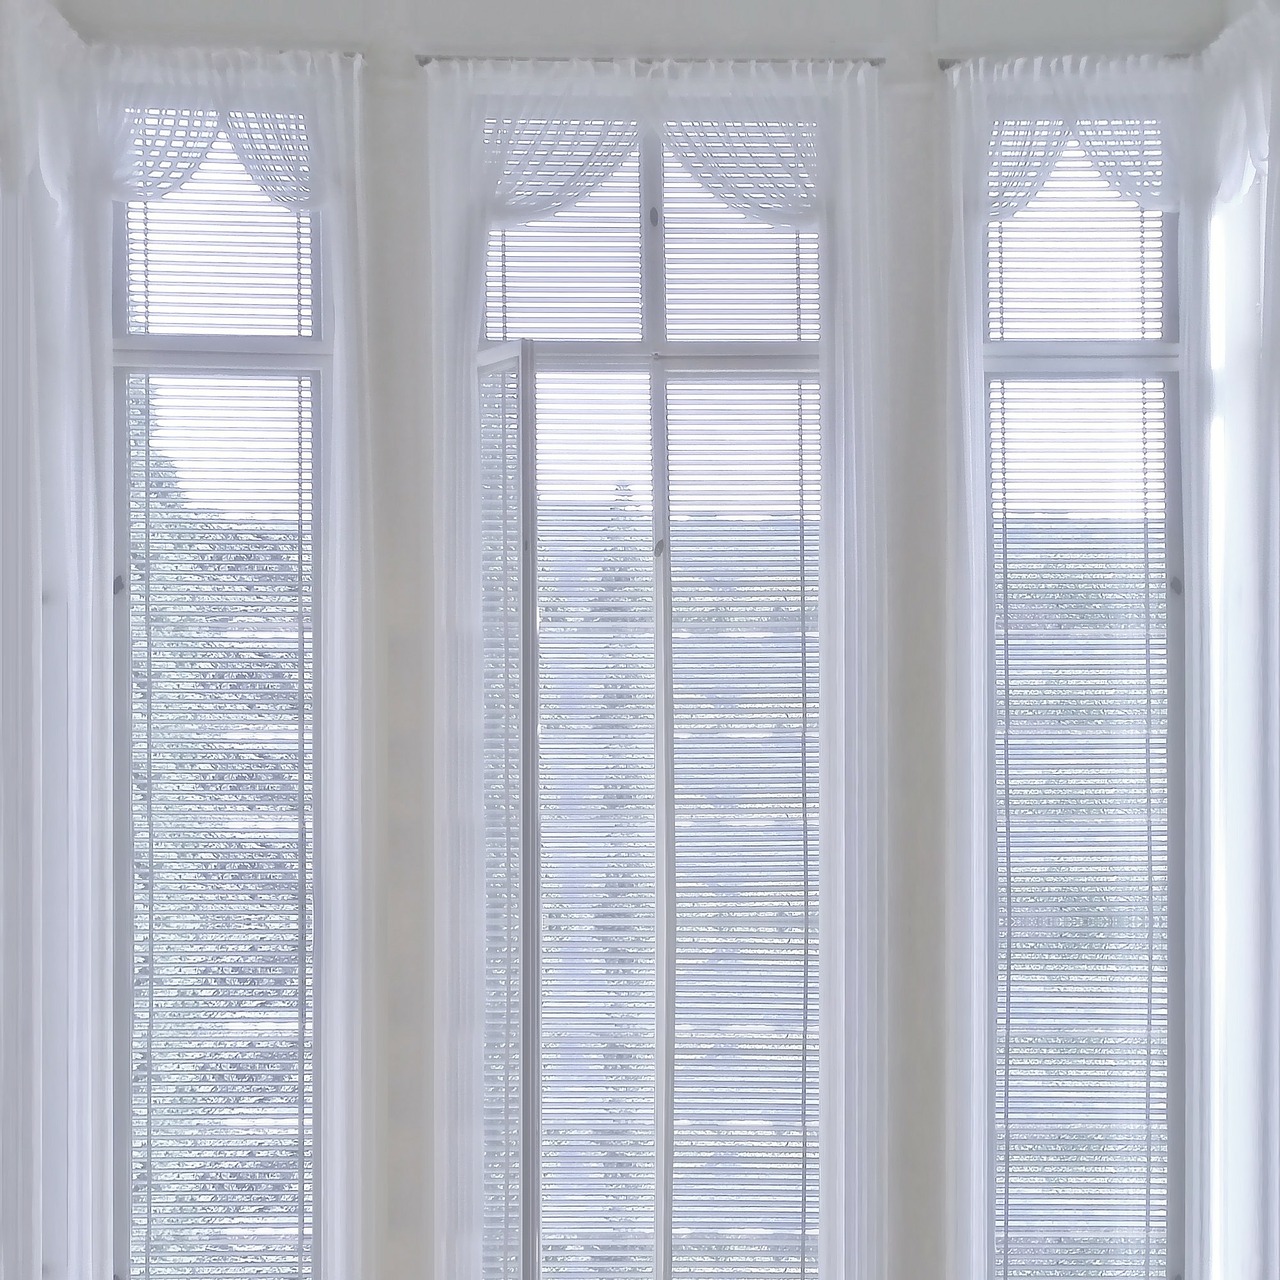 Window with treatments, blinds, and valances